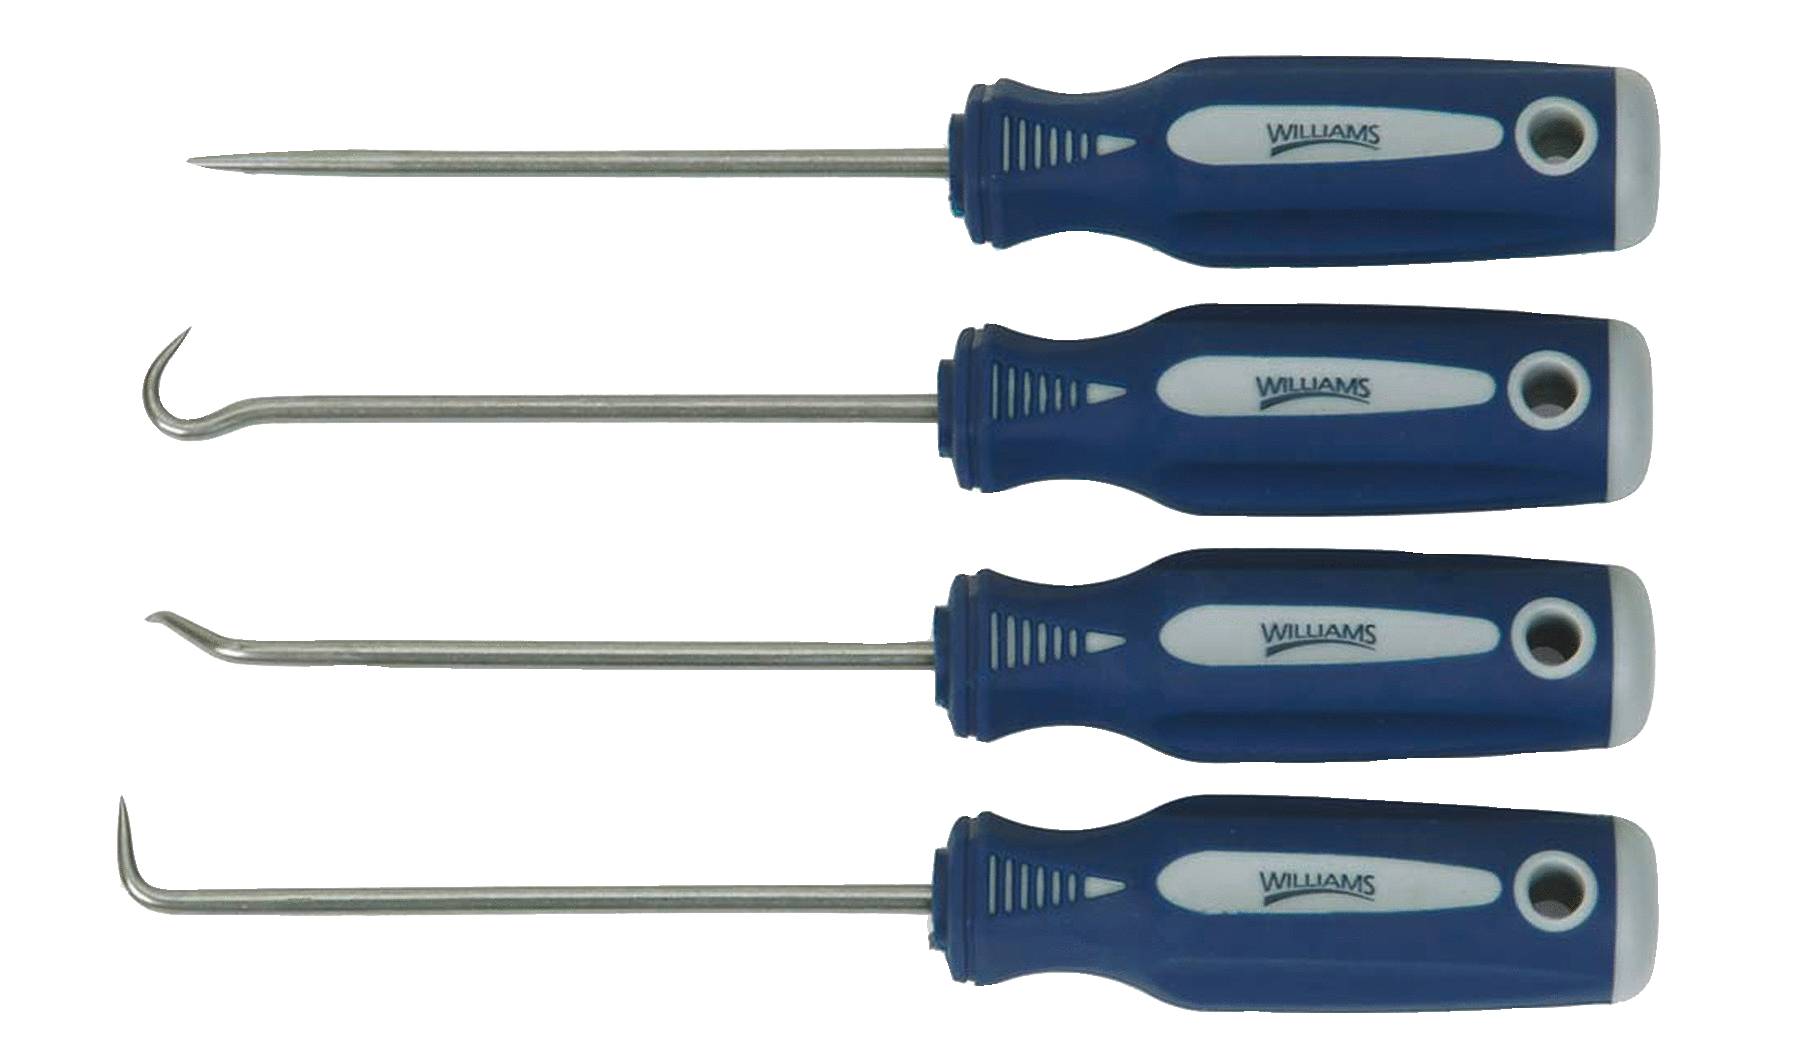 Wilde Tool SHP904 Hook and Pick Set, 4-Piece